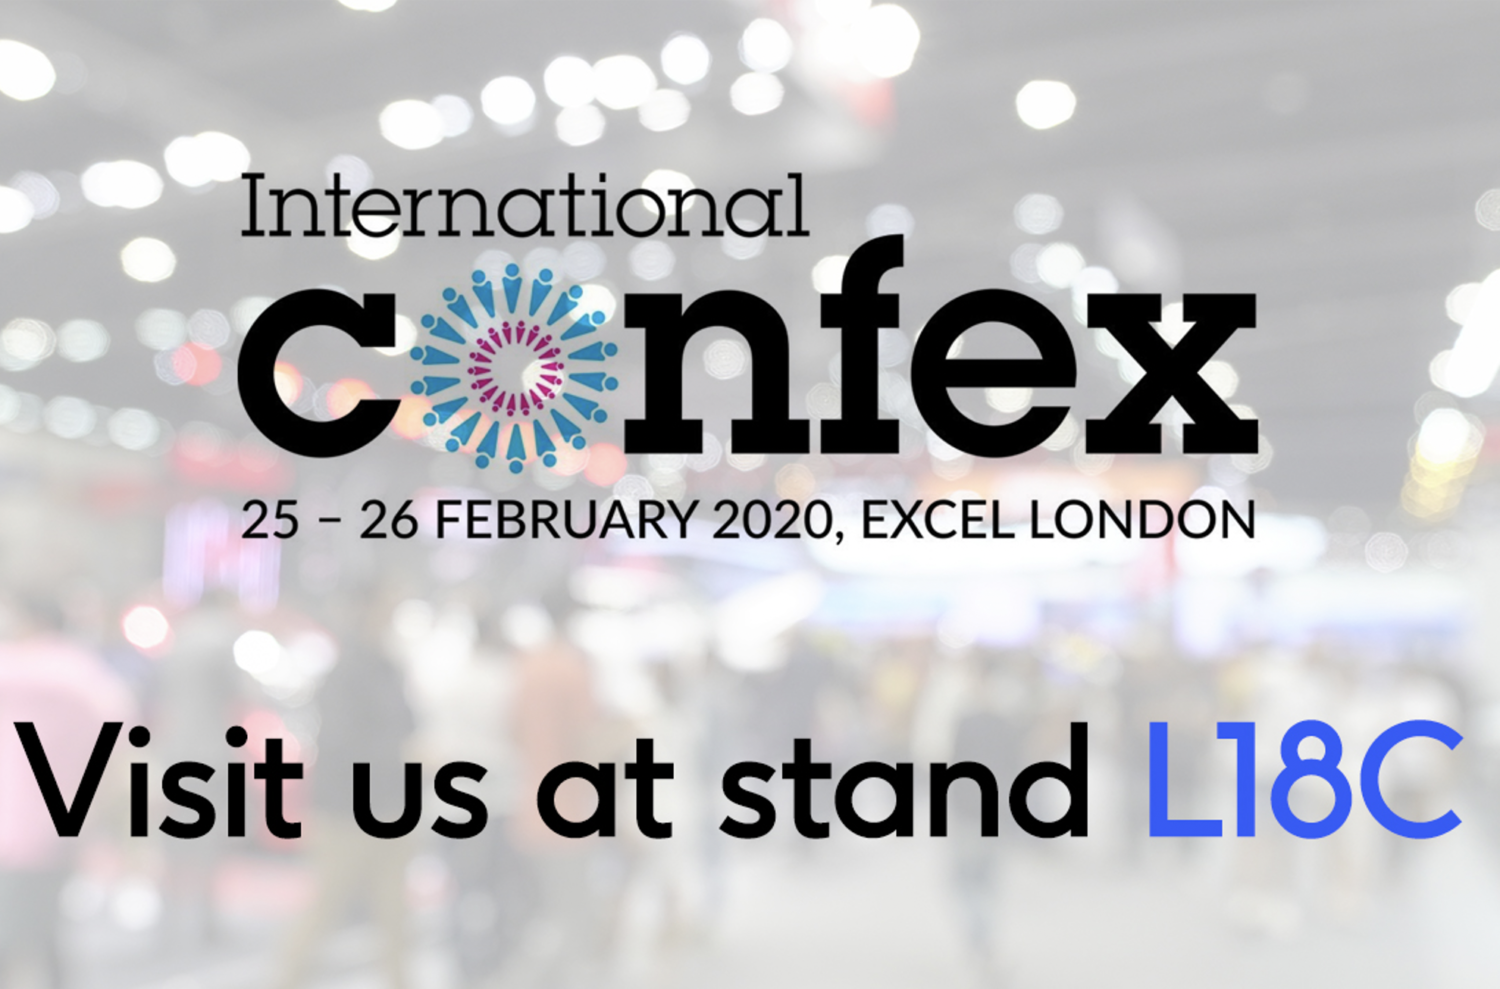 Open Audience exhibiting at International Confex 2020 at the Excel London